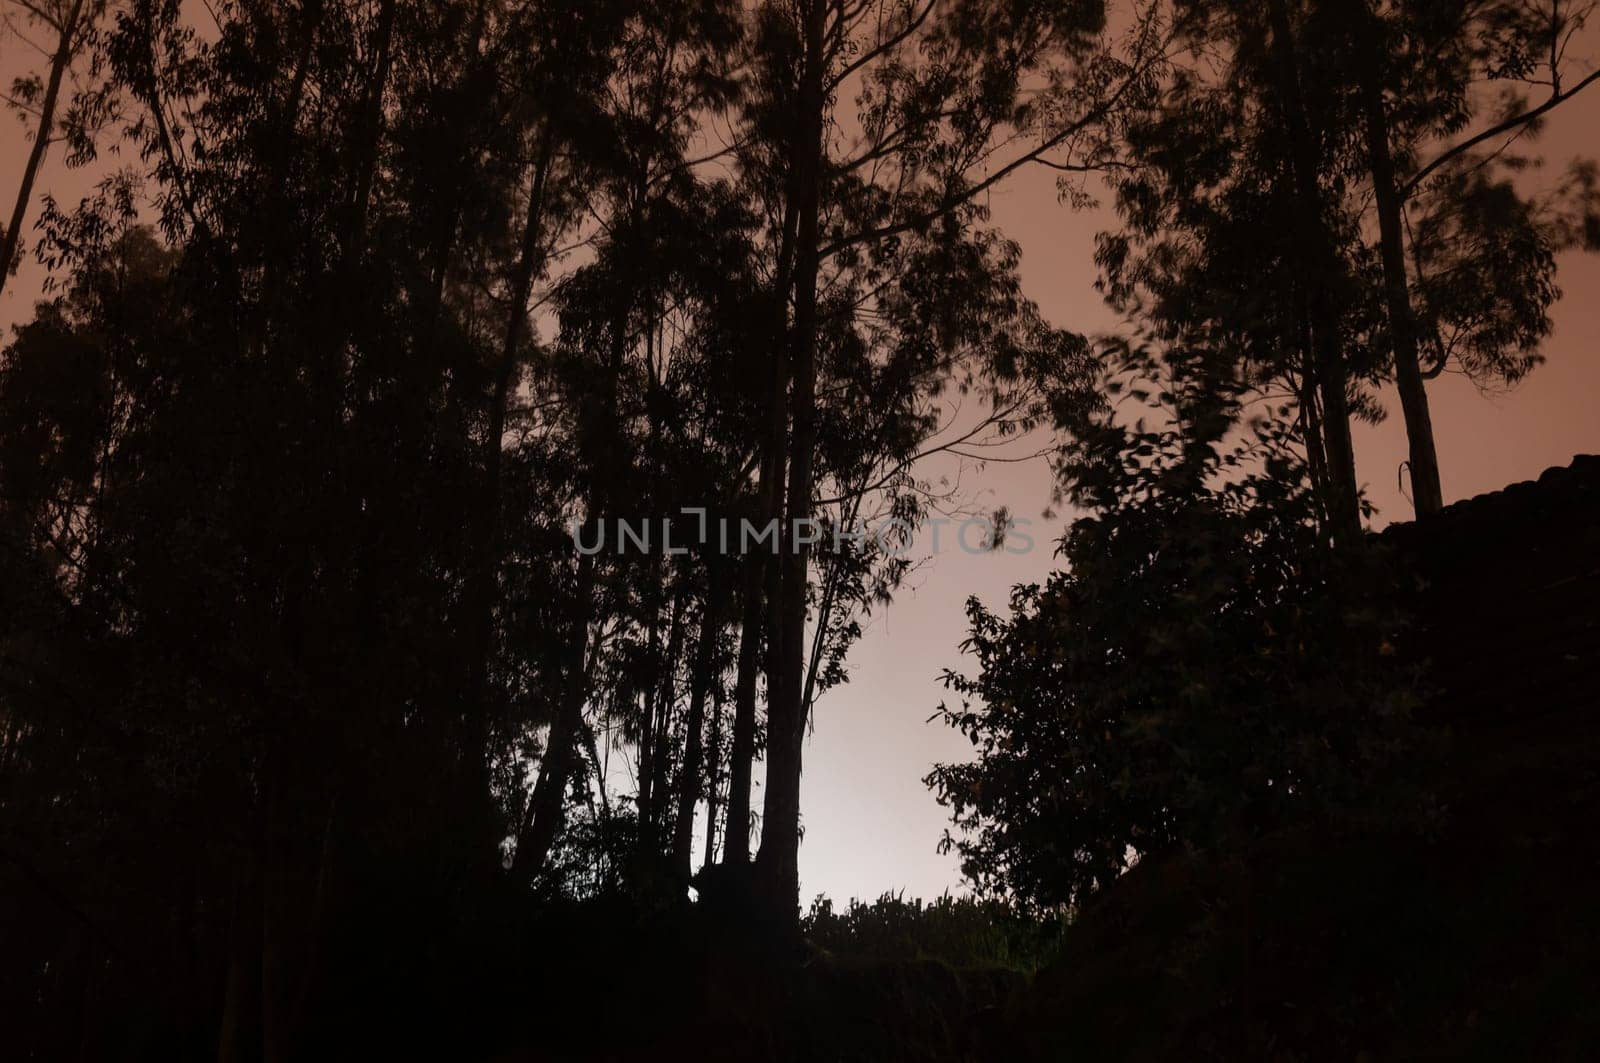 moonlit forest scenery the white and orange light and the black silhouettes of a lush forest. High quality photo